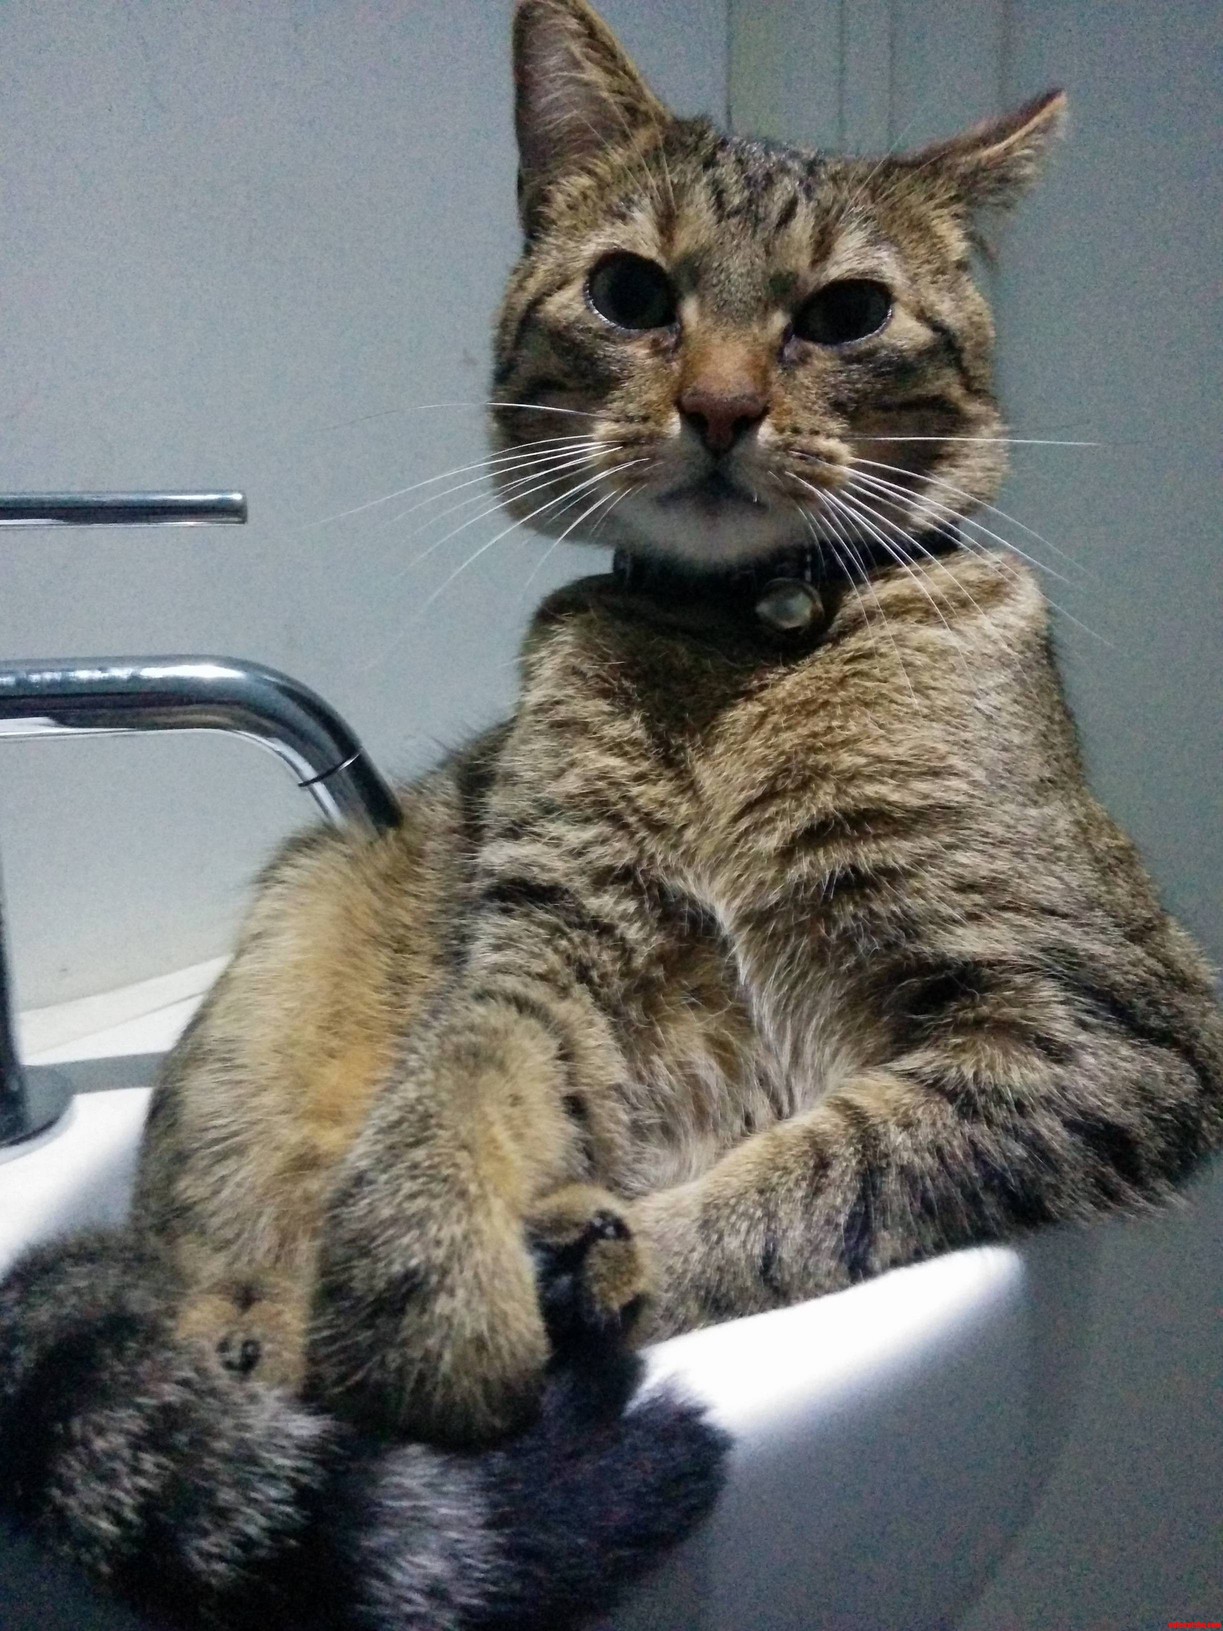 Ever get that feeling youre being judged while having a poo